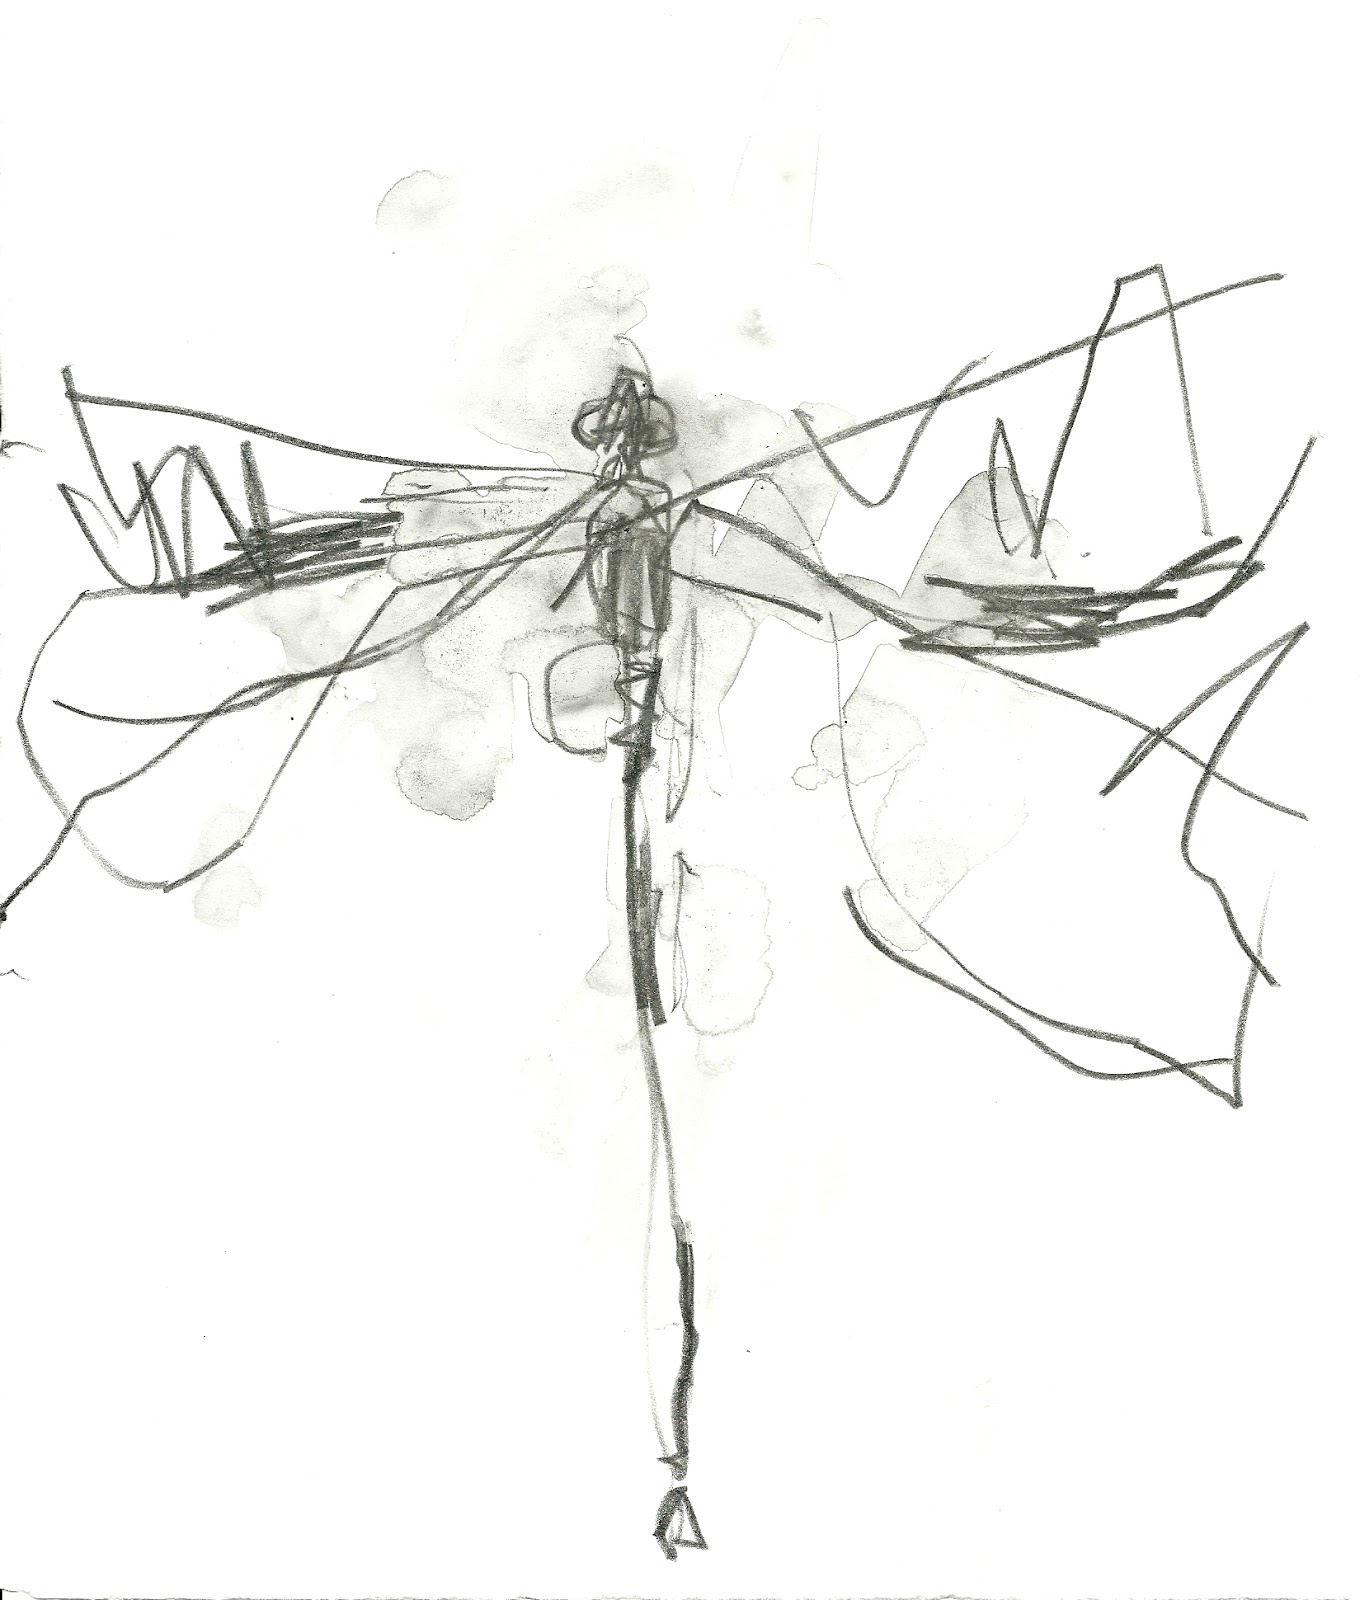 Dragonfly Drawing Template